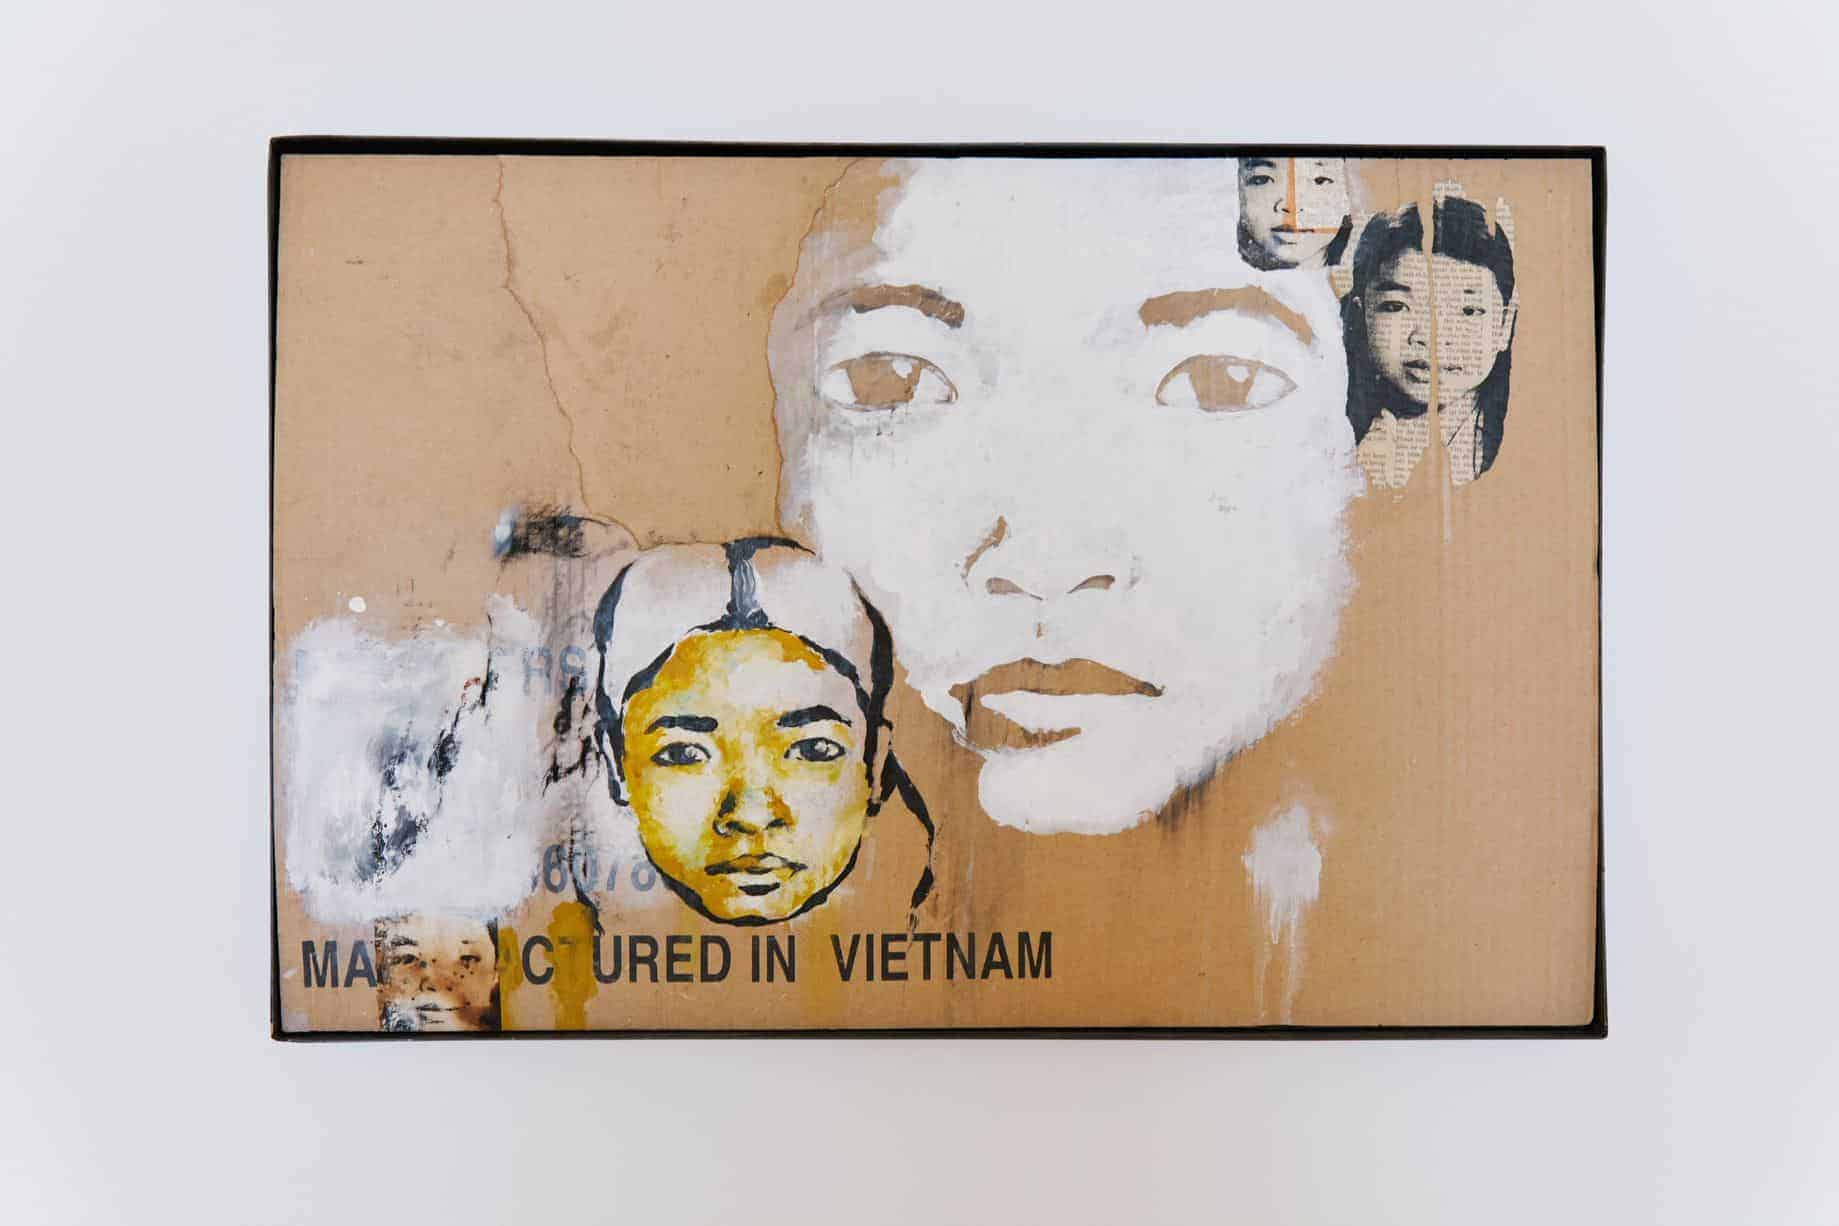 Mai's Ma cured in Vietnam is a portrait of her mother at age 17.